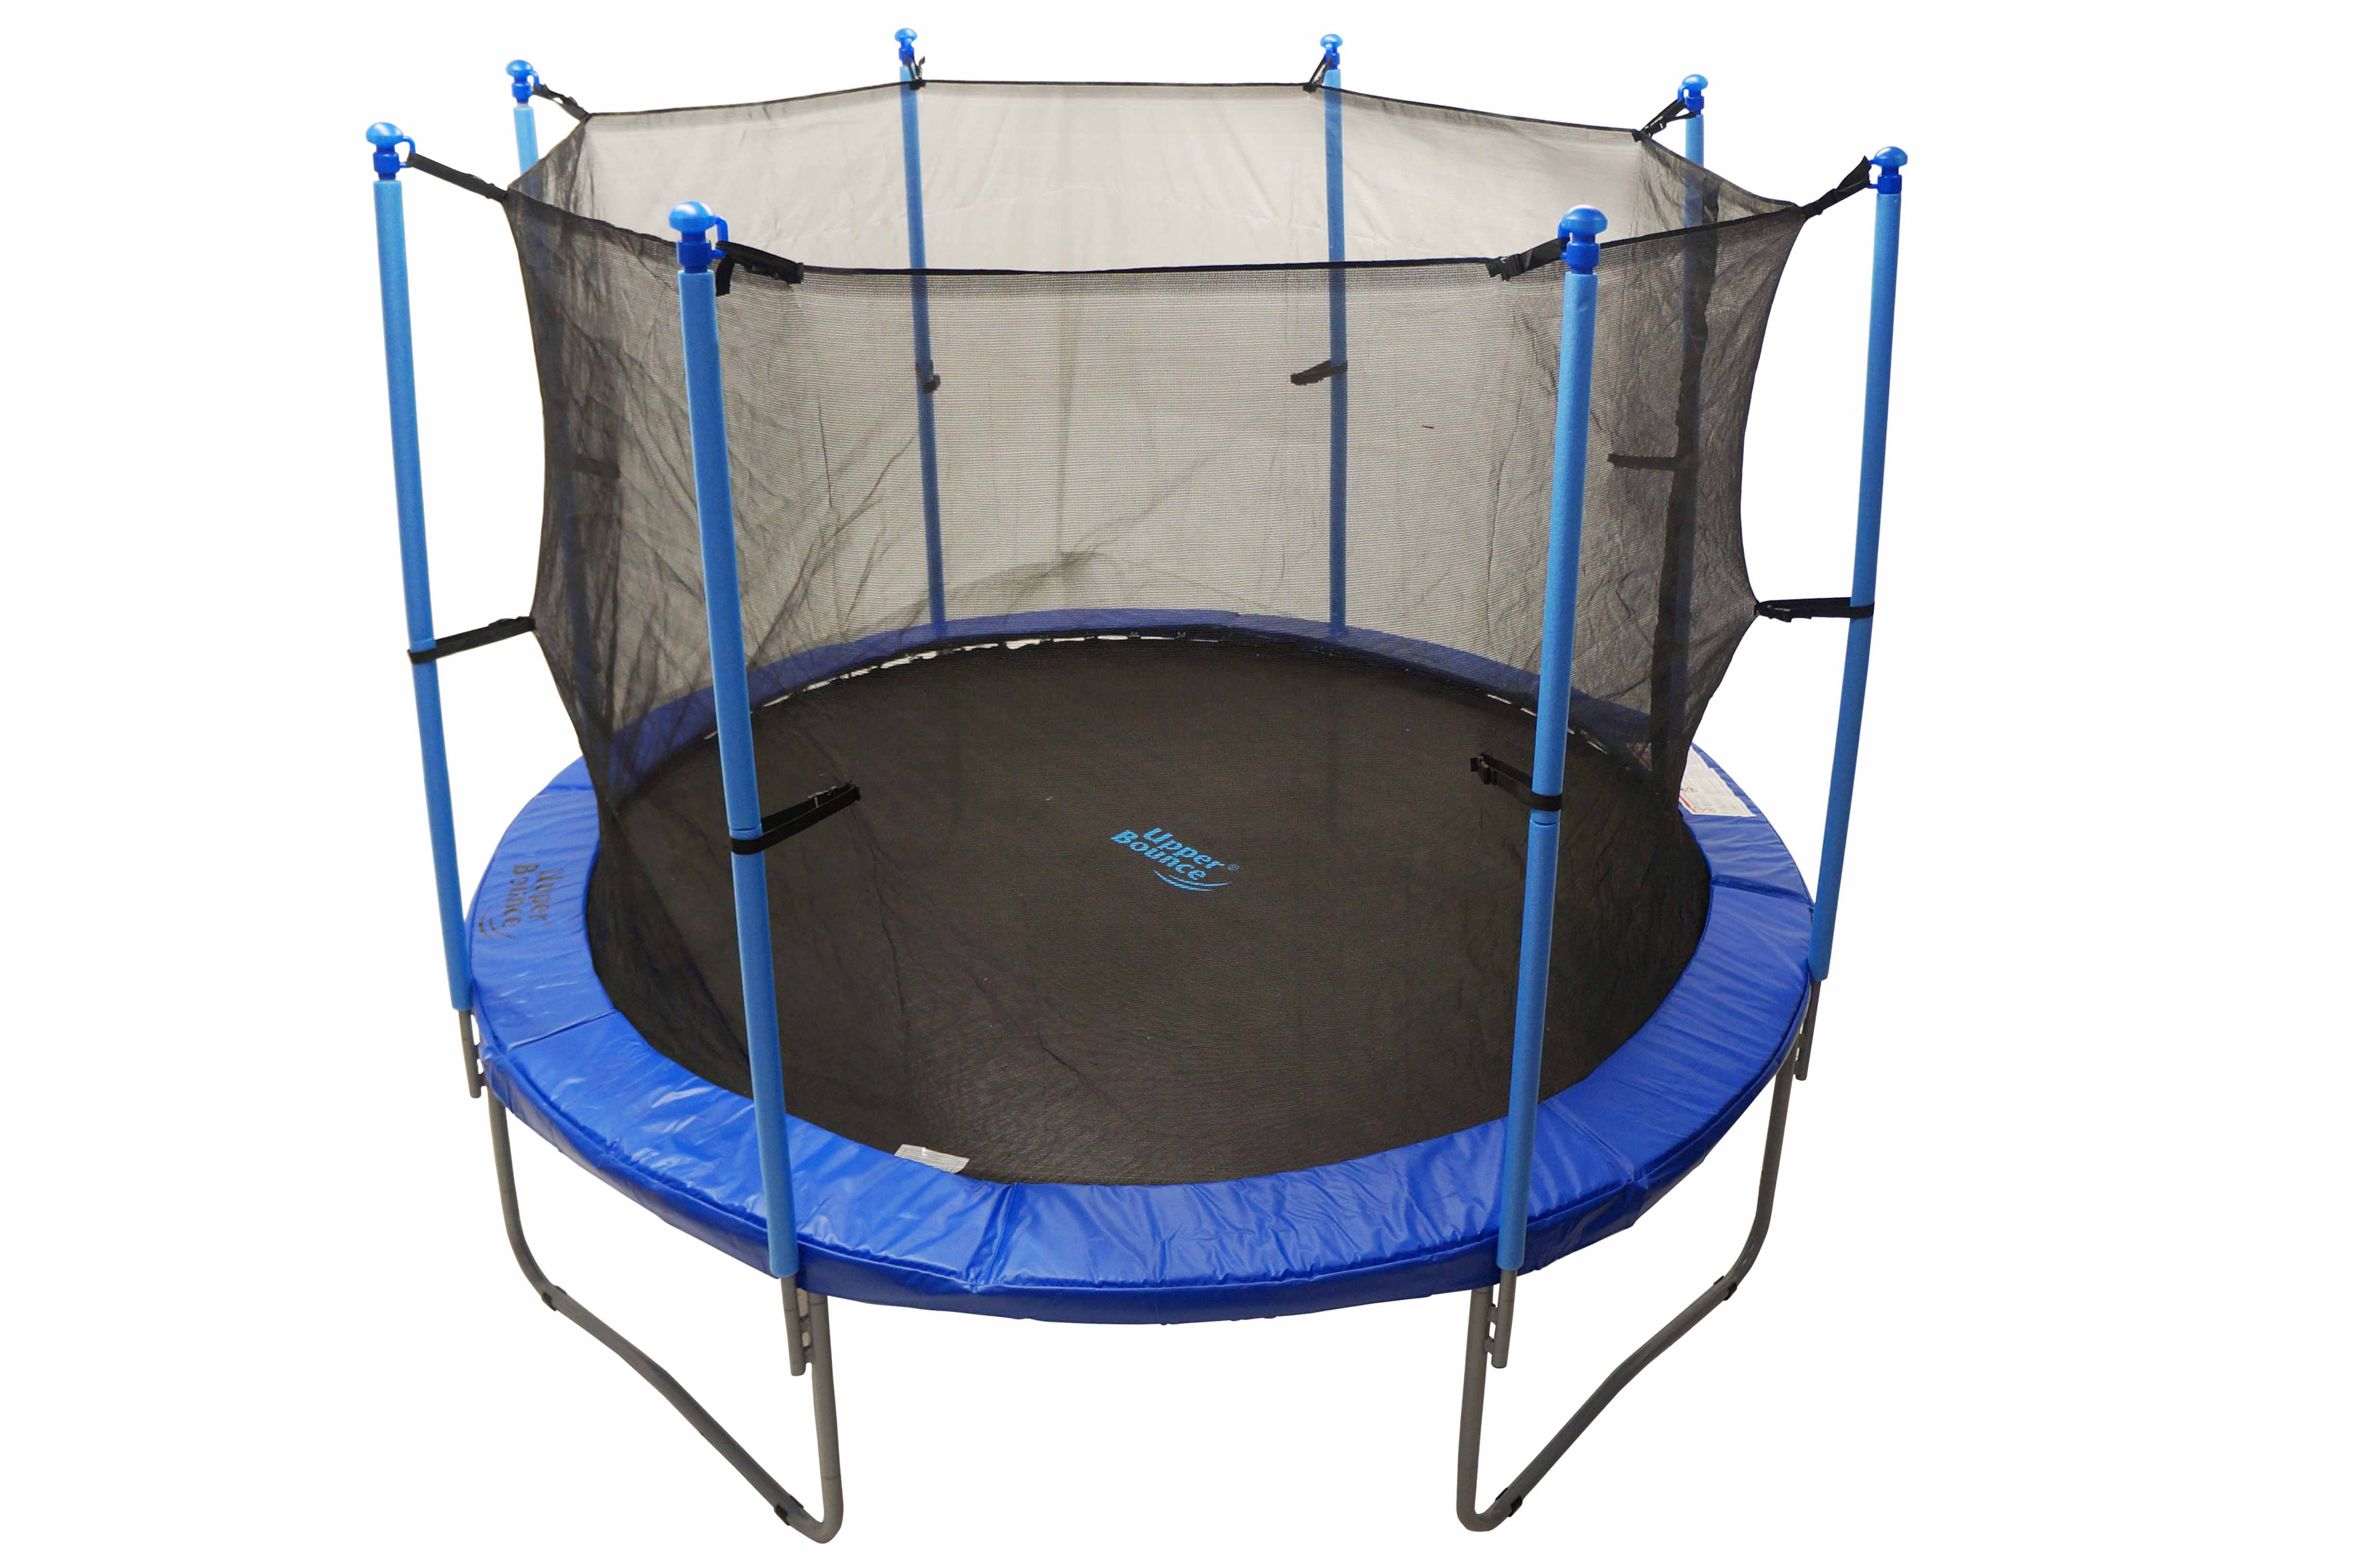 Picture of Upper Bounce UBSF01-10 10 FT. Trampoline &amp; Enclosure Set equipped with the New UPPER BOUNCE EASY ASSEMBLE FEATUREá